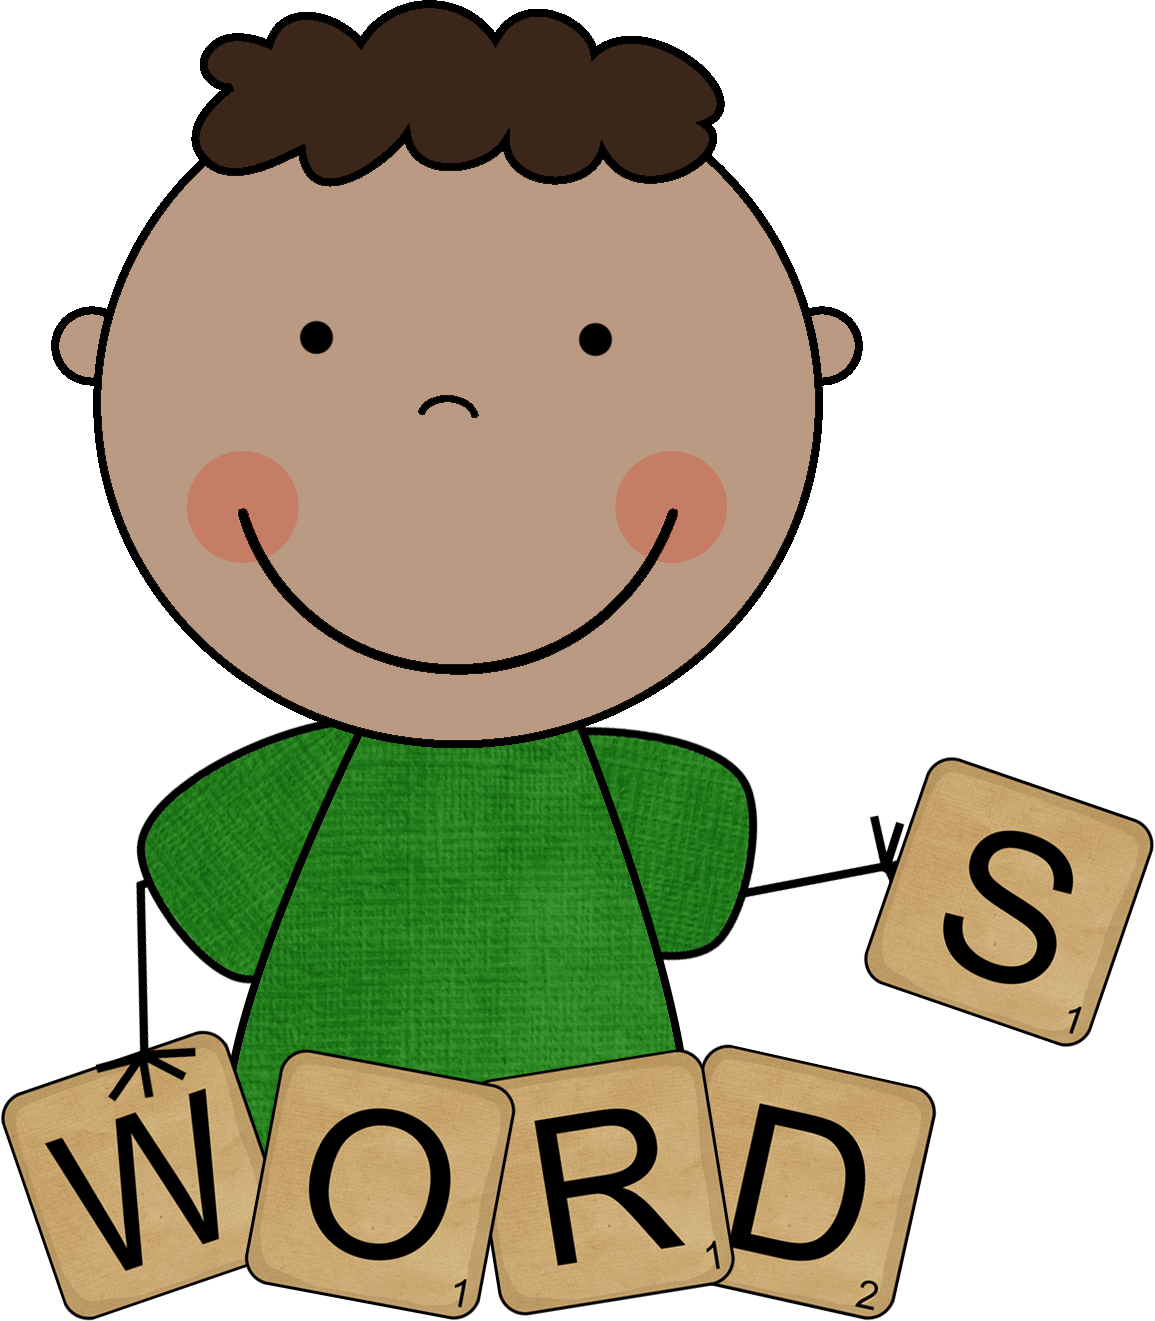 Daily 5 Word Work Clipart   Clipart Panda   Free Clipart Images